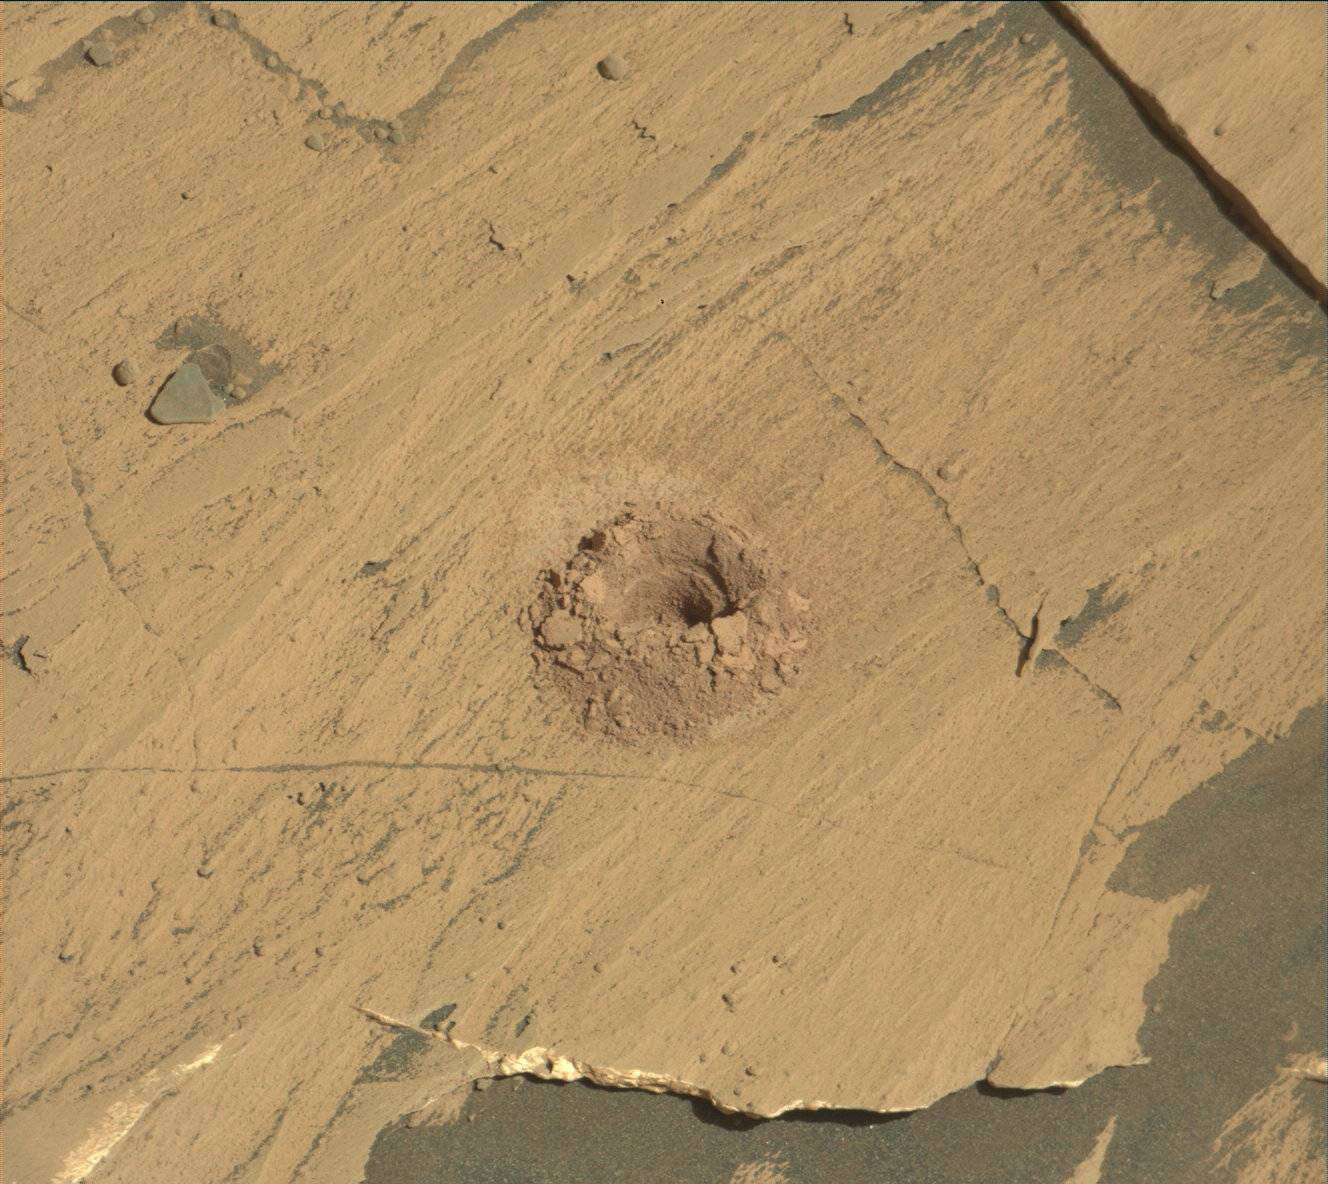 This is an image of the sandy surface of Mars. There are several cracks in the surface and a quarter sized hole with grainy crushed sand surrounding the hole. Curiosity’s shadow is in the bottom right corner. 